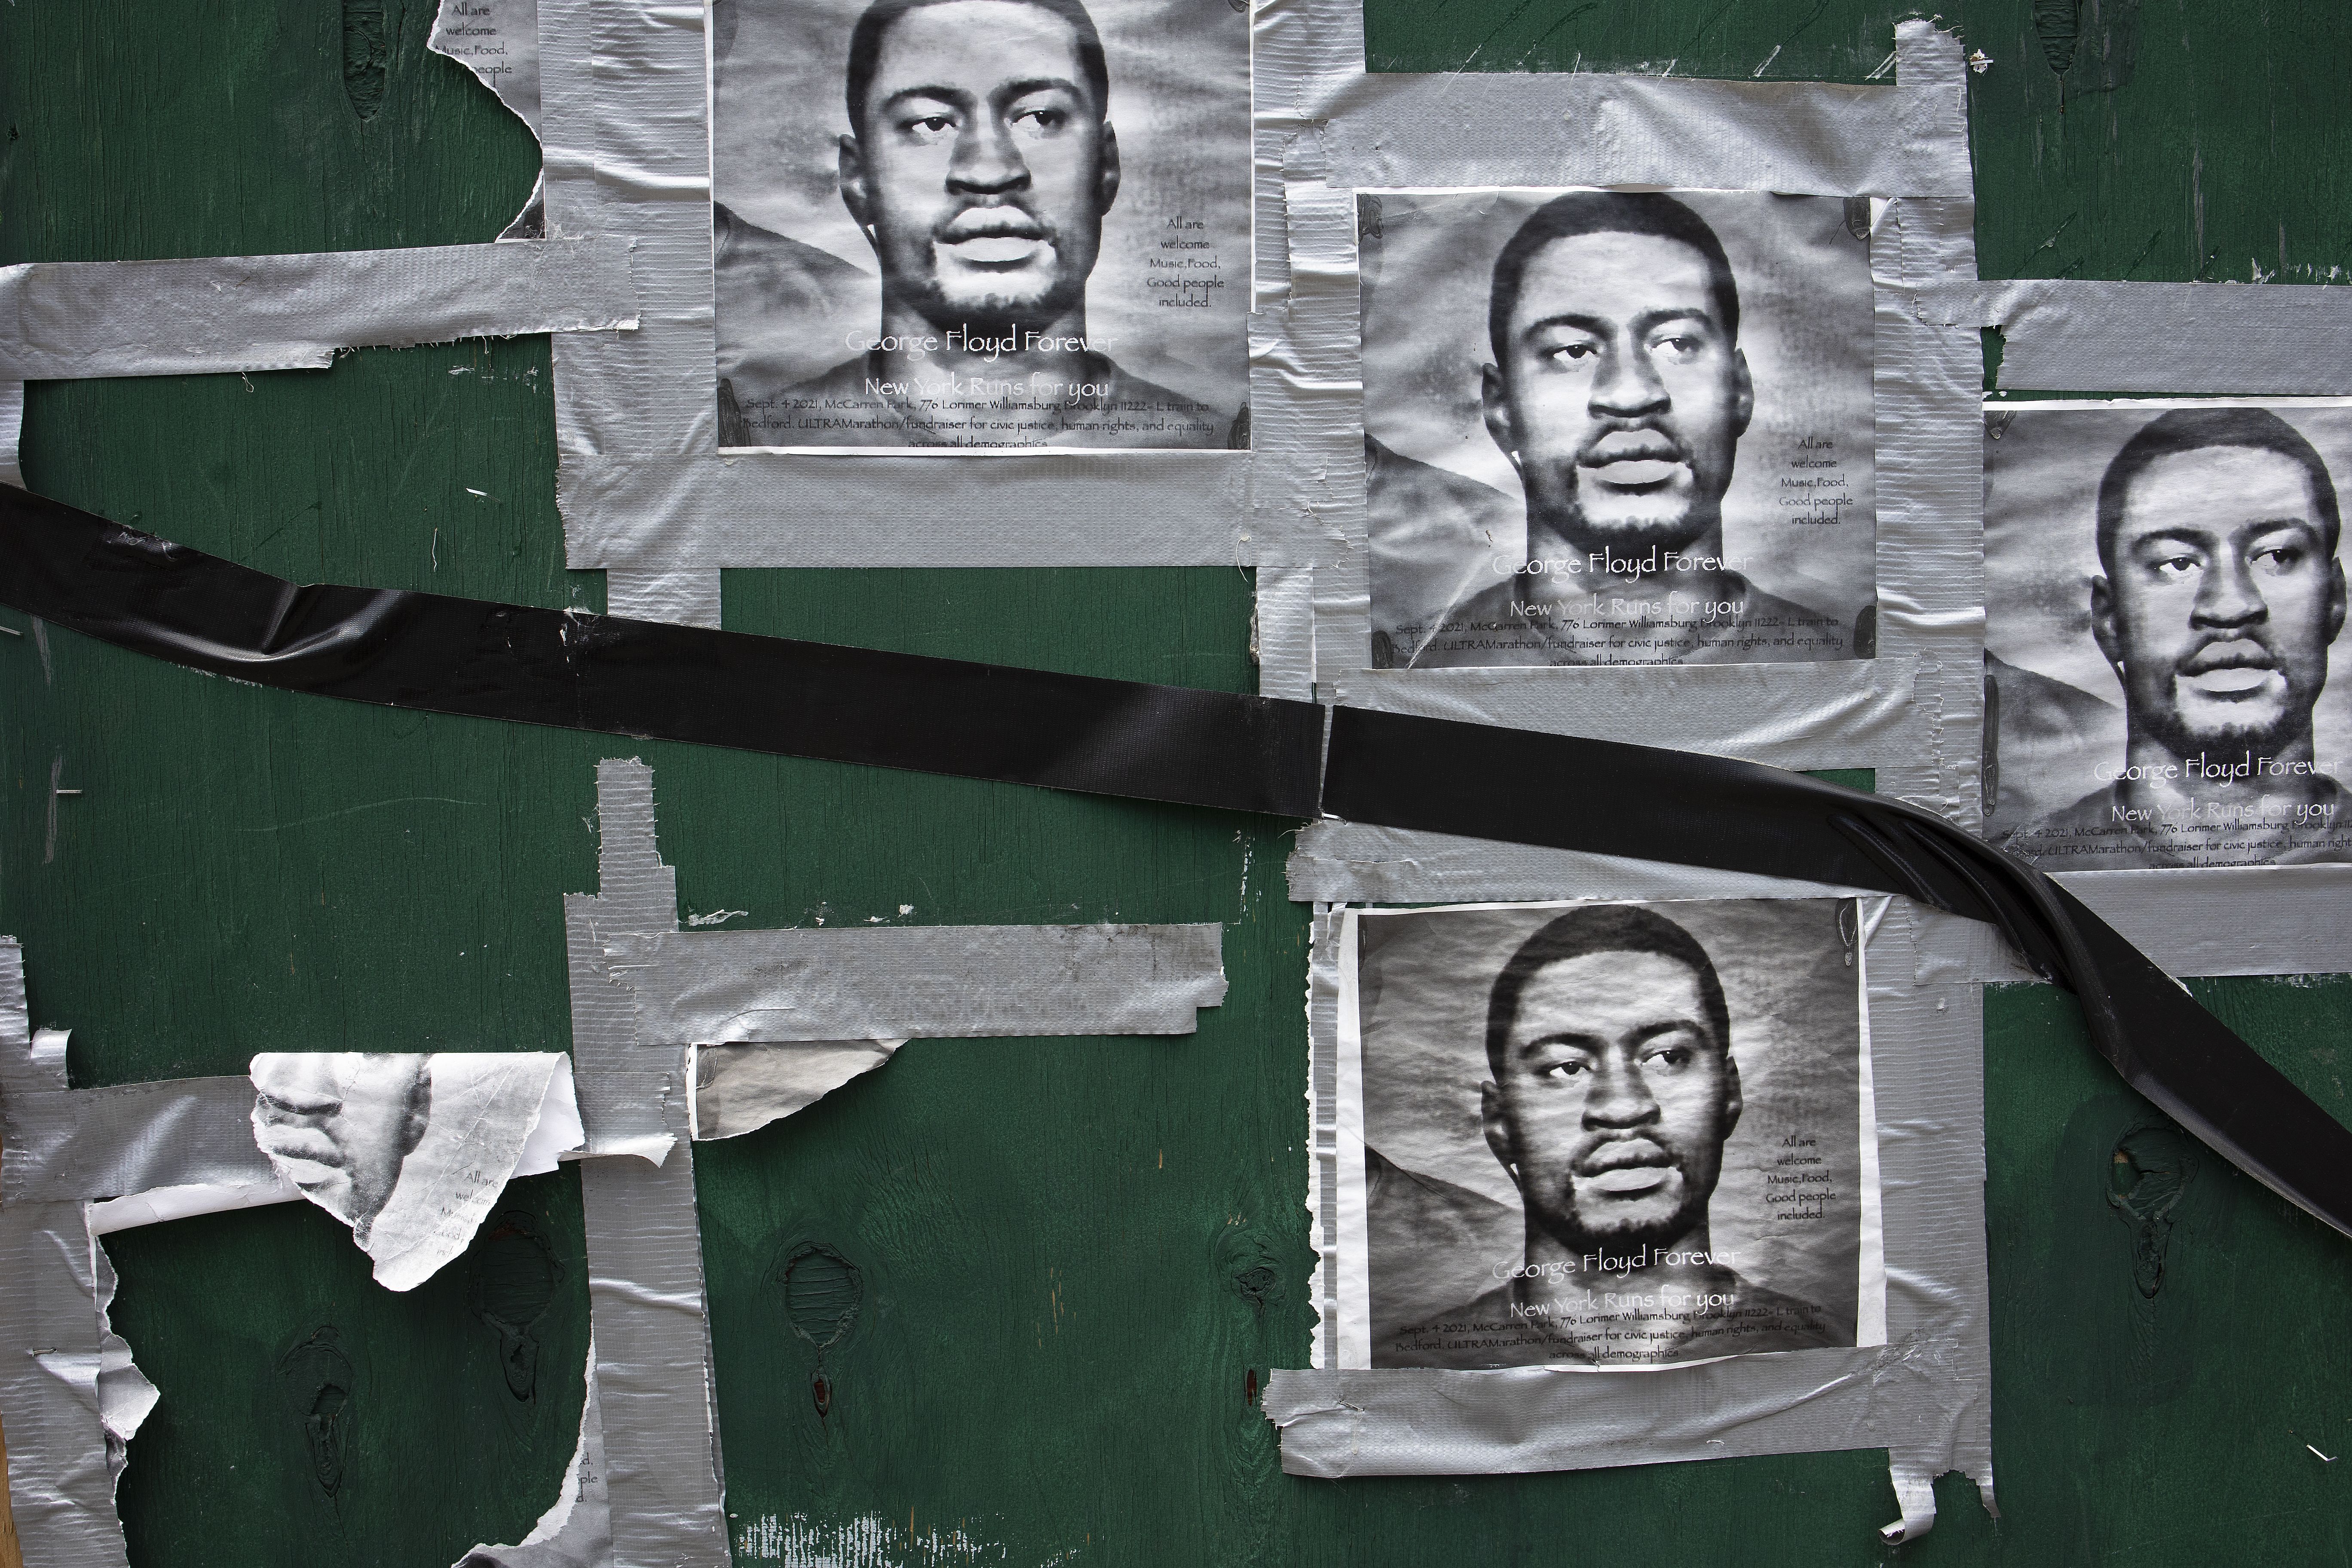 Photo of posters that depict George Floyd taped on a green wall